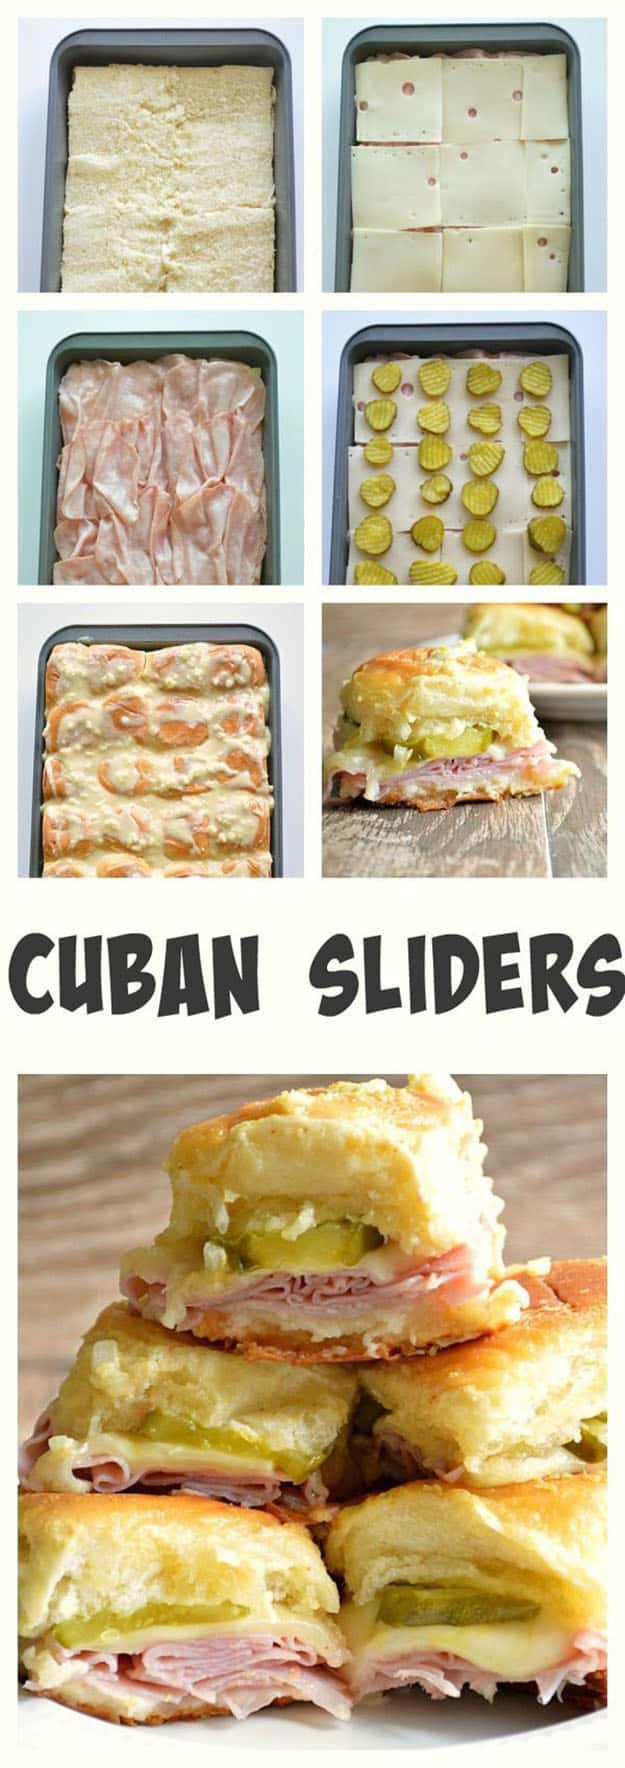 Easy Party Food Ideas | Cheap Food for a Crowd | Cuban Sliders Recipe | DIY Projects and Crafts by DIY JOY #appetizers #partyfood #recipes